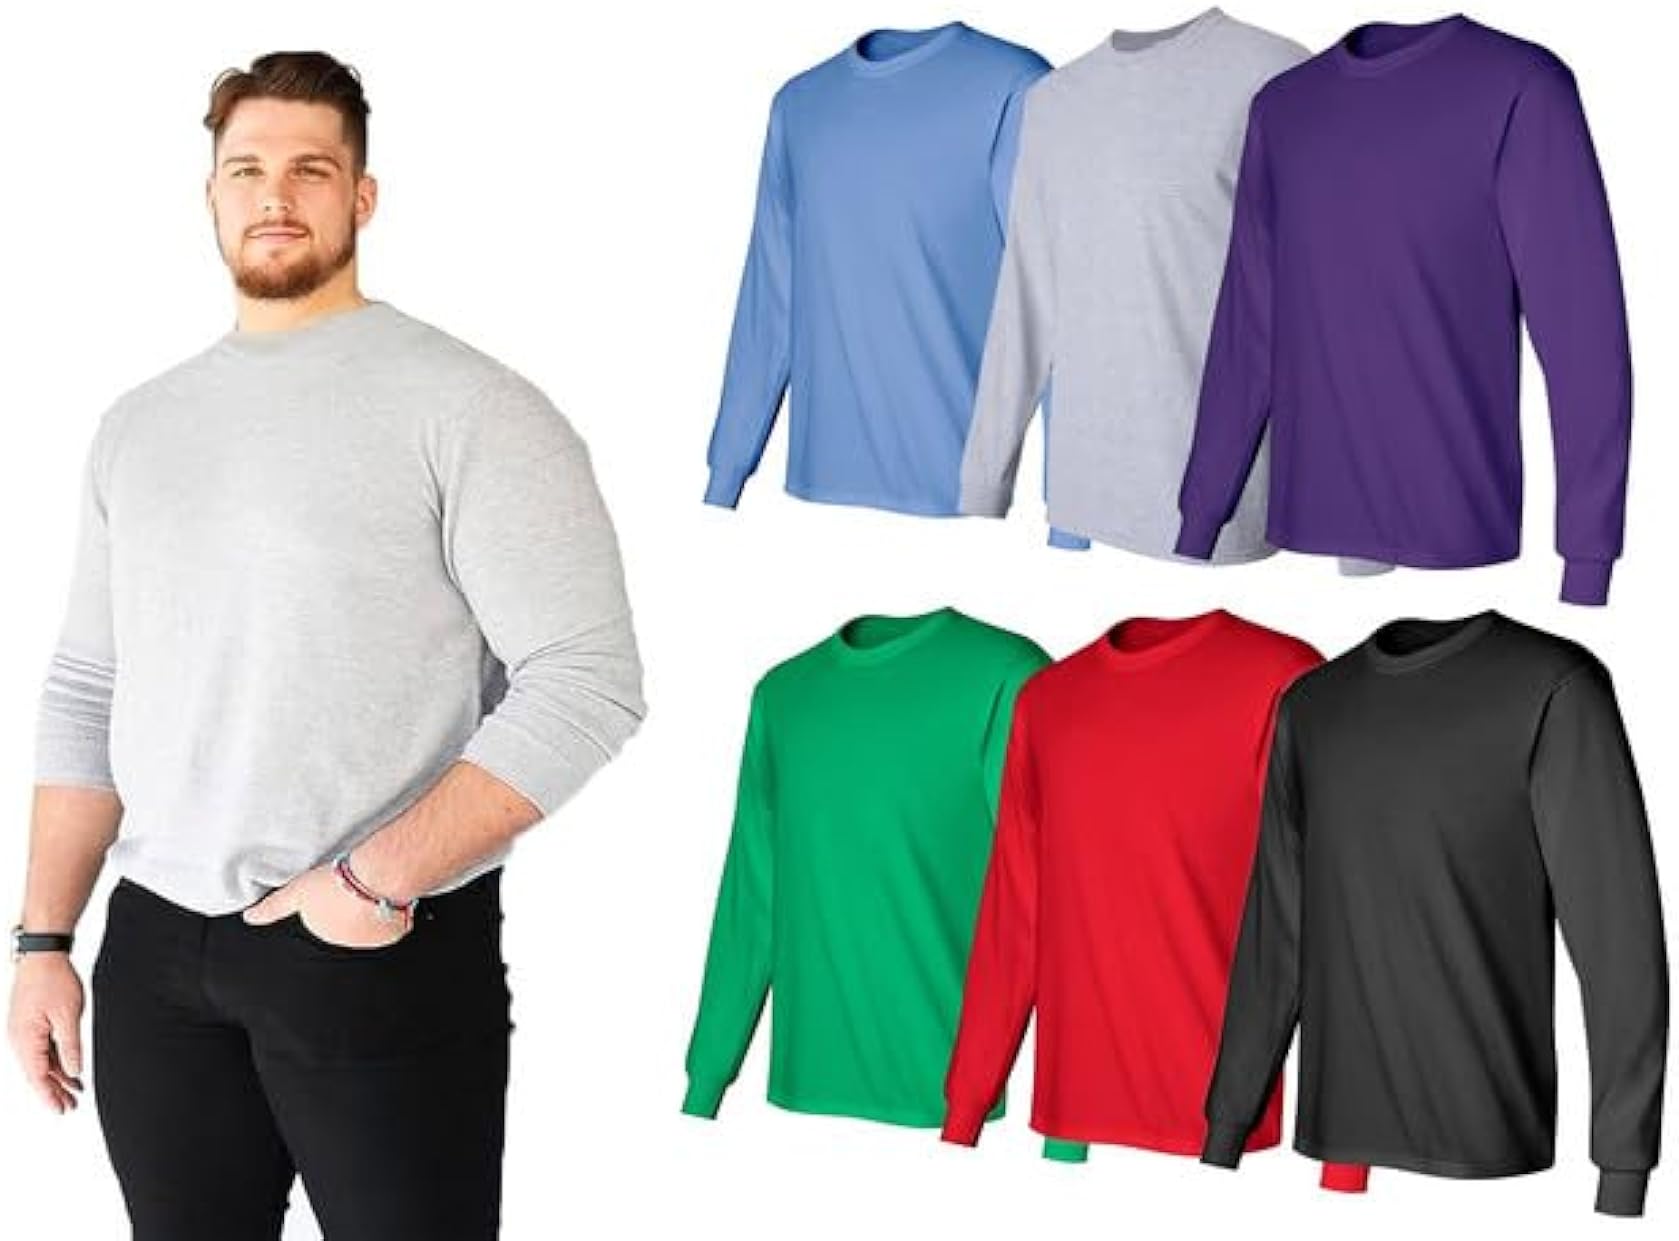 BILLIONHATS 6 Pack Big & Tall Long Sleeve Colorful T-Shirts for Mens 100% Cotton - Crew Neck Bulk Tees Wholesale Packs